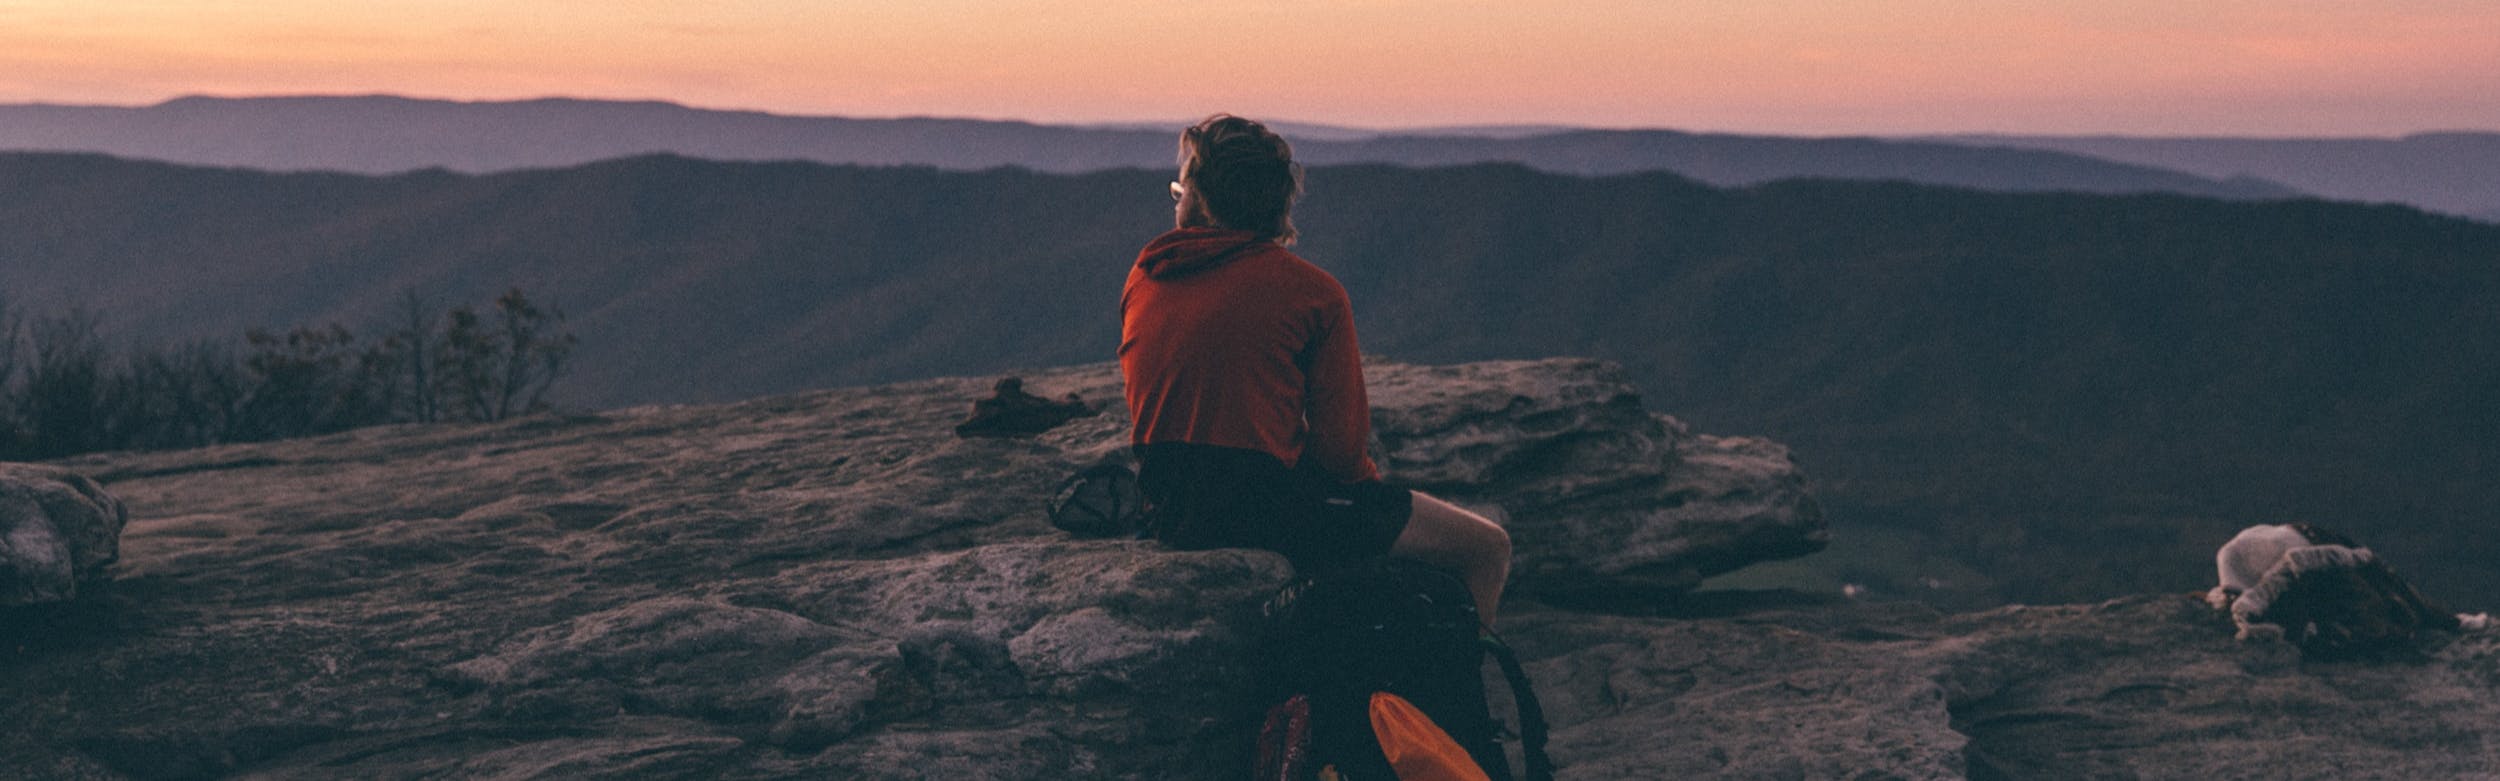 A man sits on a rock overlooking mountains on a sunset.